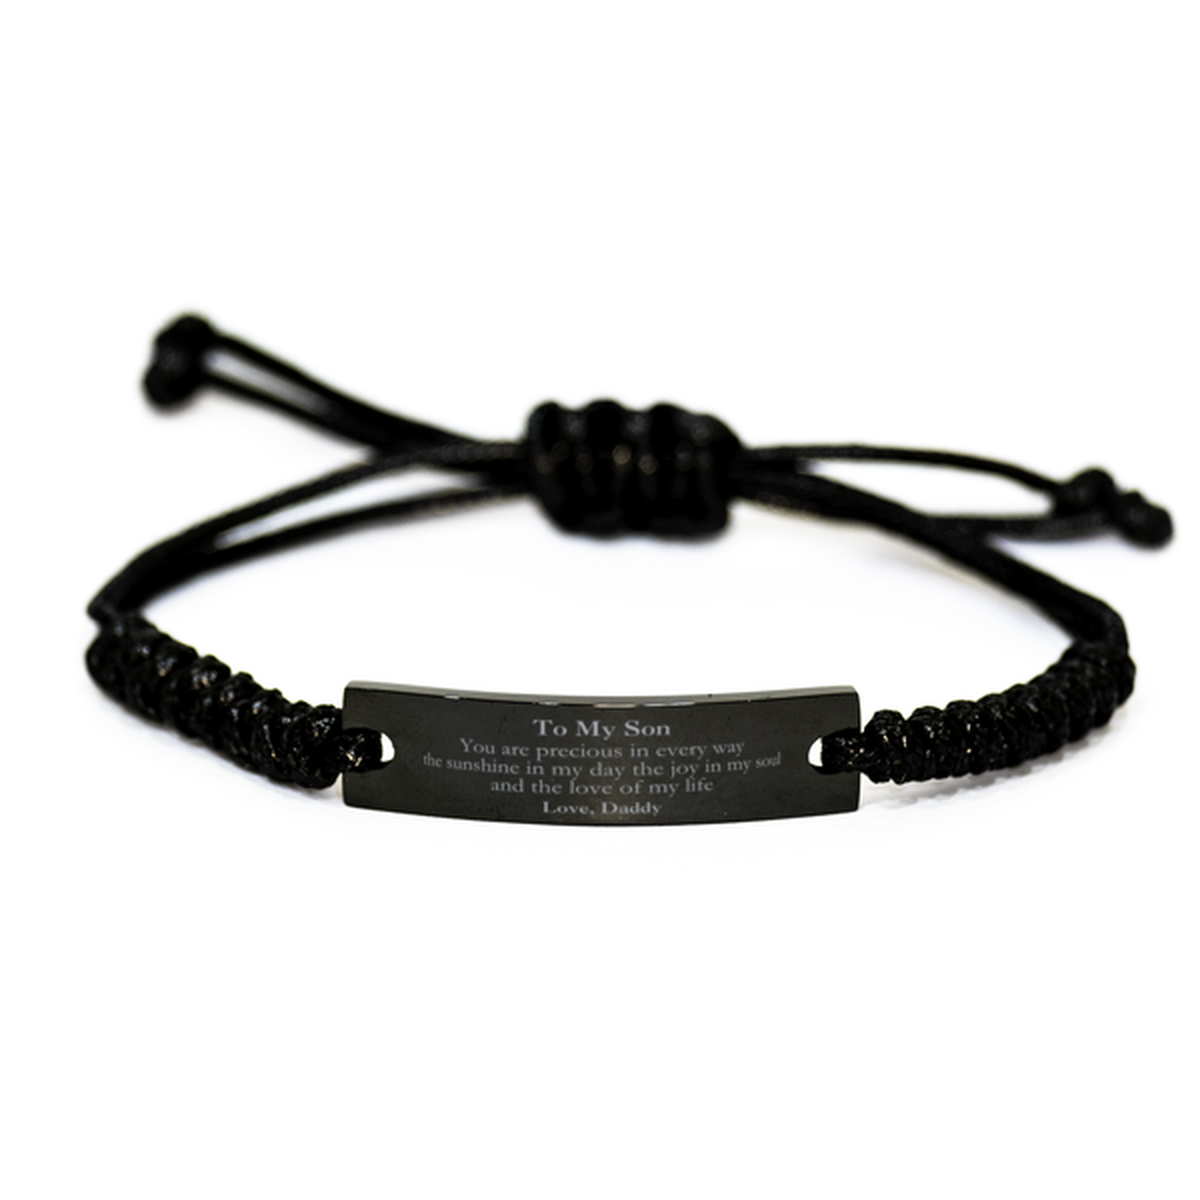 Graduation Gifts for Son Black Rope Bracelet Present from Daddy, Christmas Son Birthday Gifts Son You are precious in every way the sunshine in my day. Love, Daddy